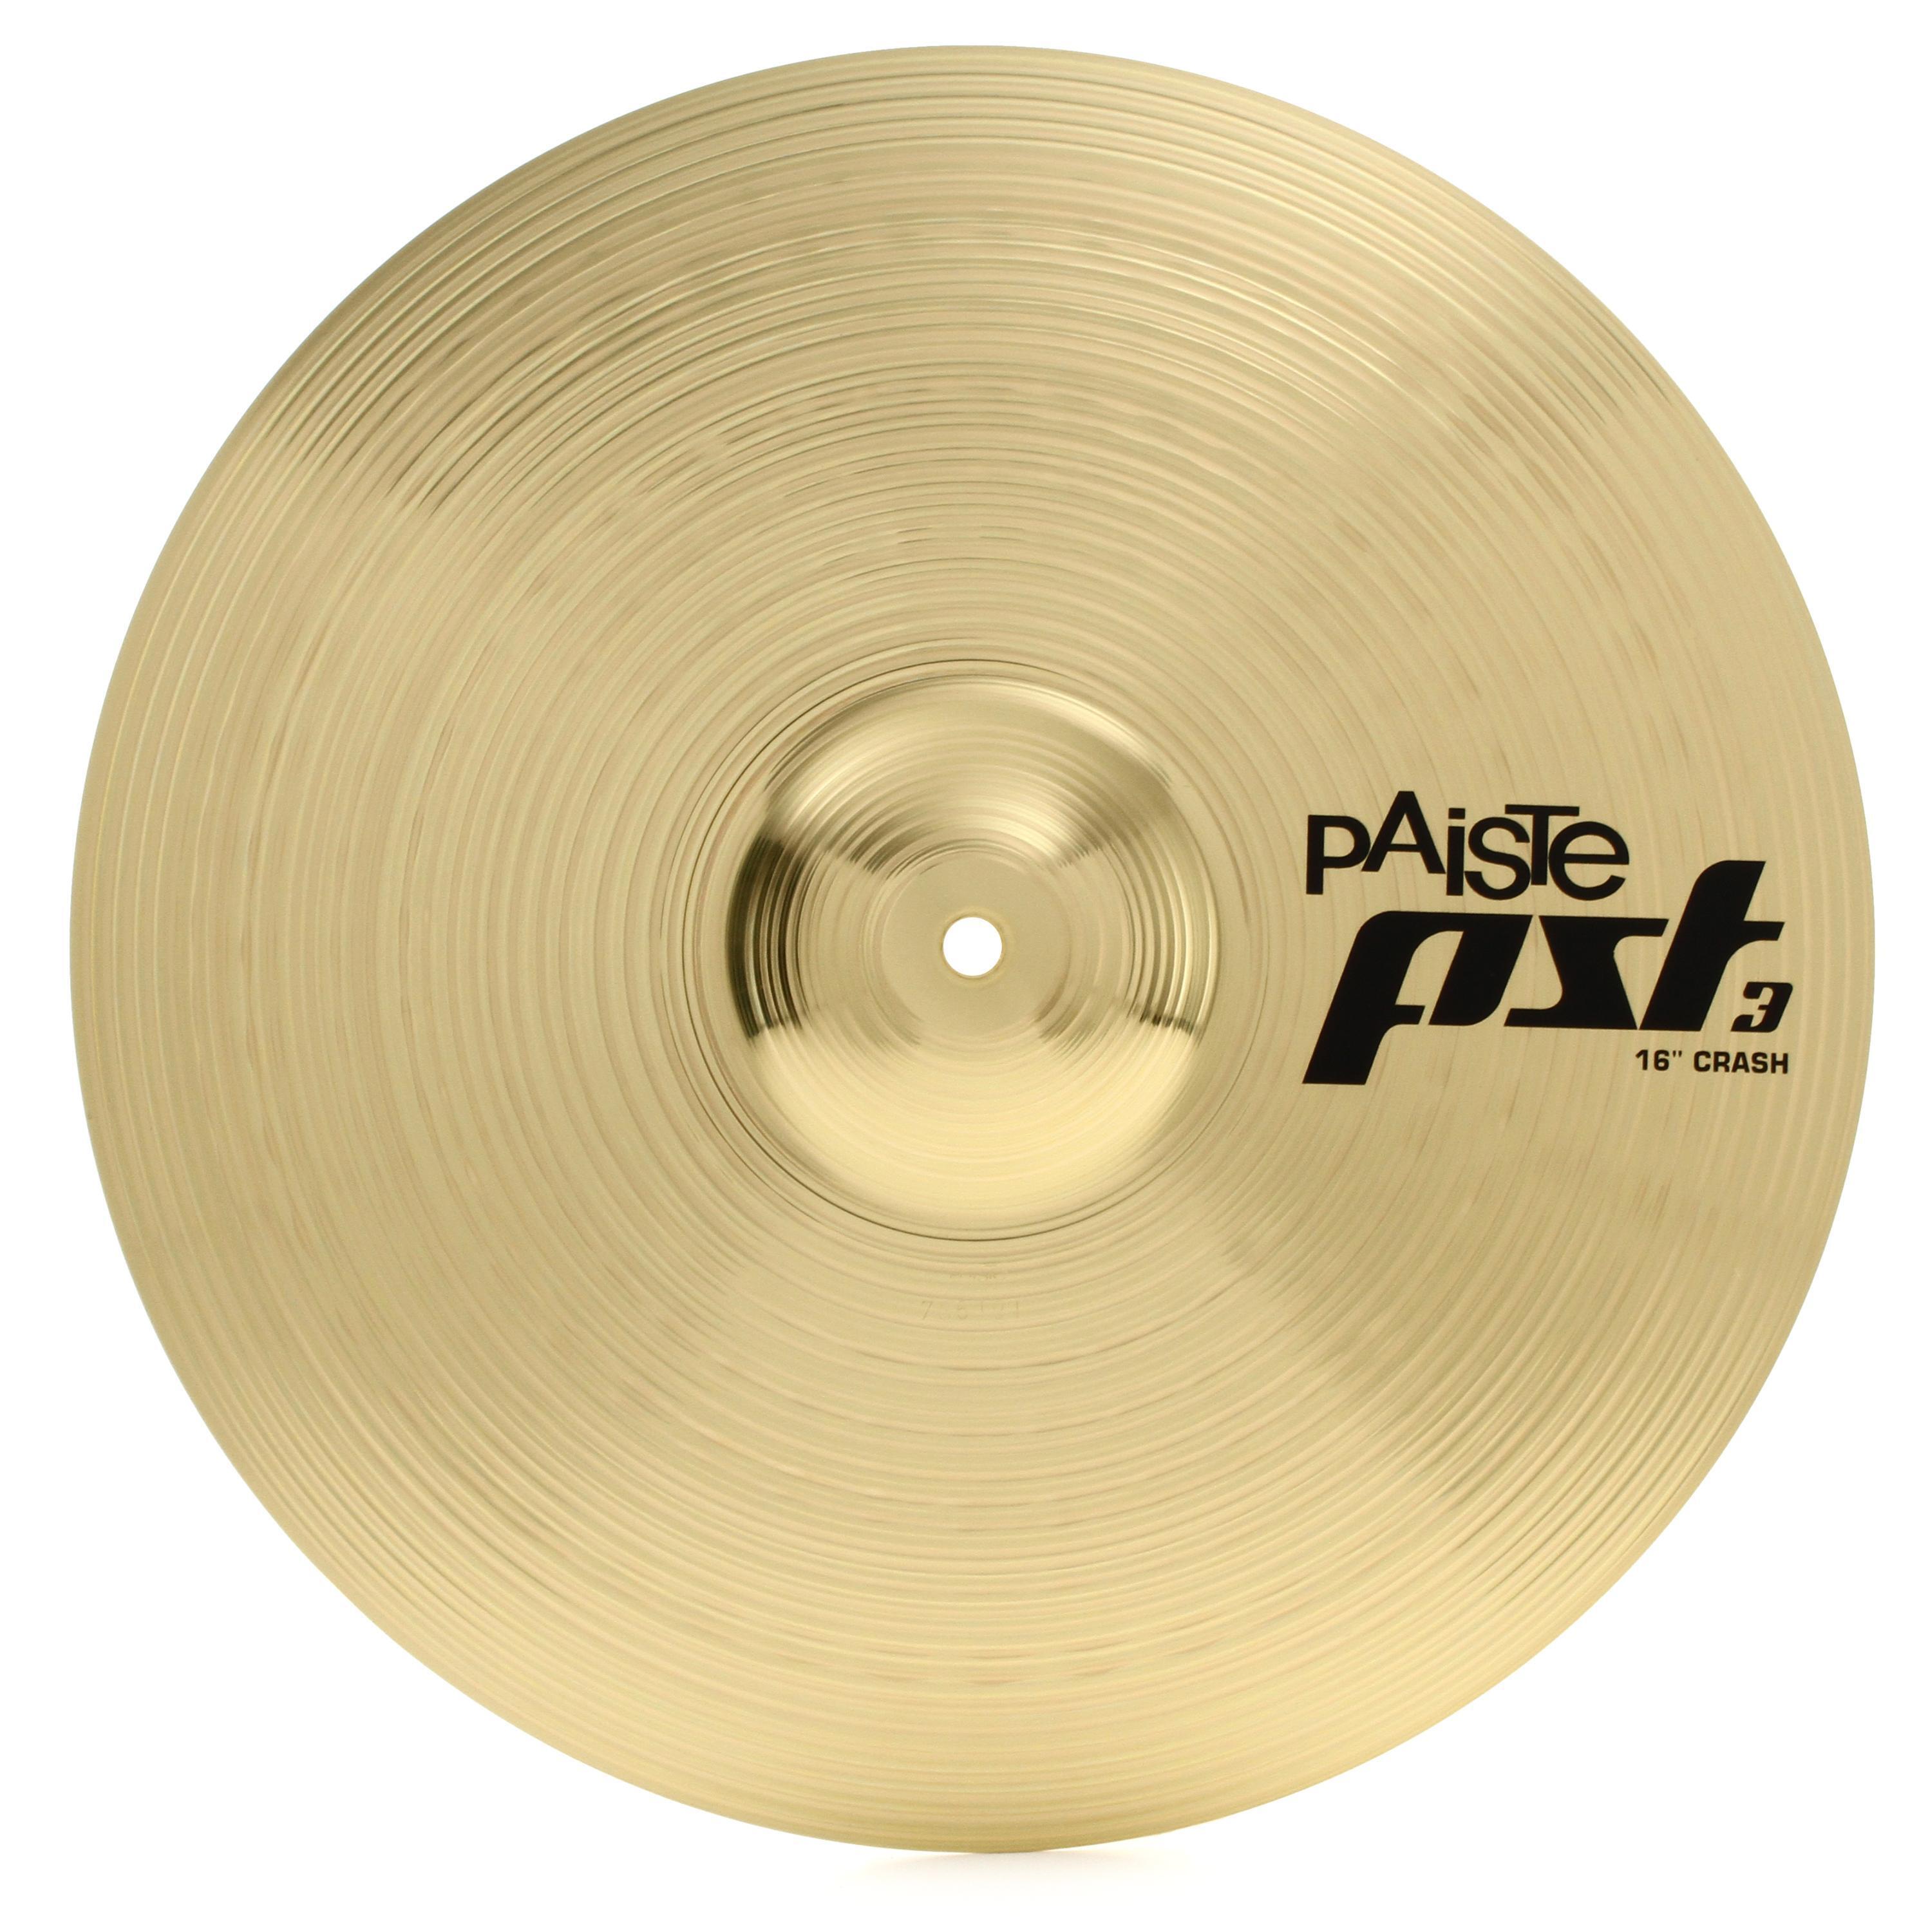 Paiste 16-inch PST 7 Crash Cymbal | Sweetwater